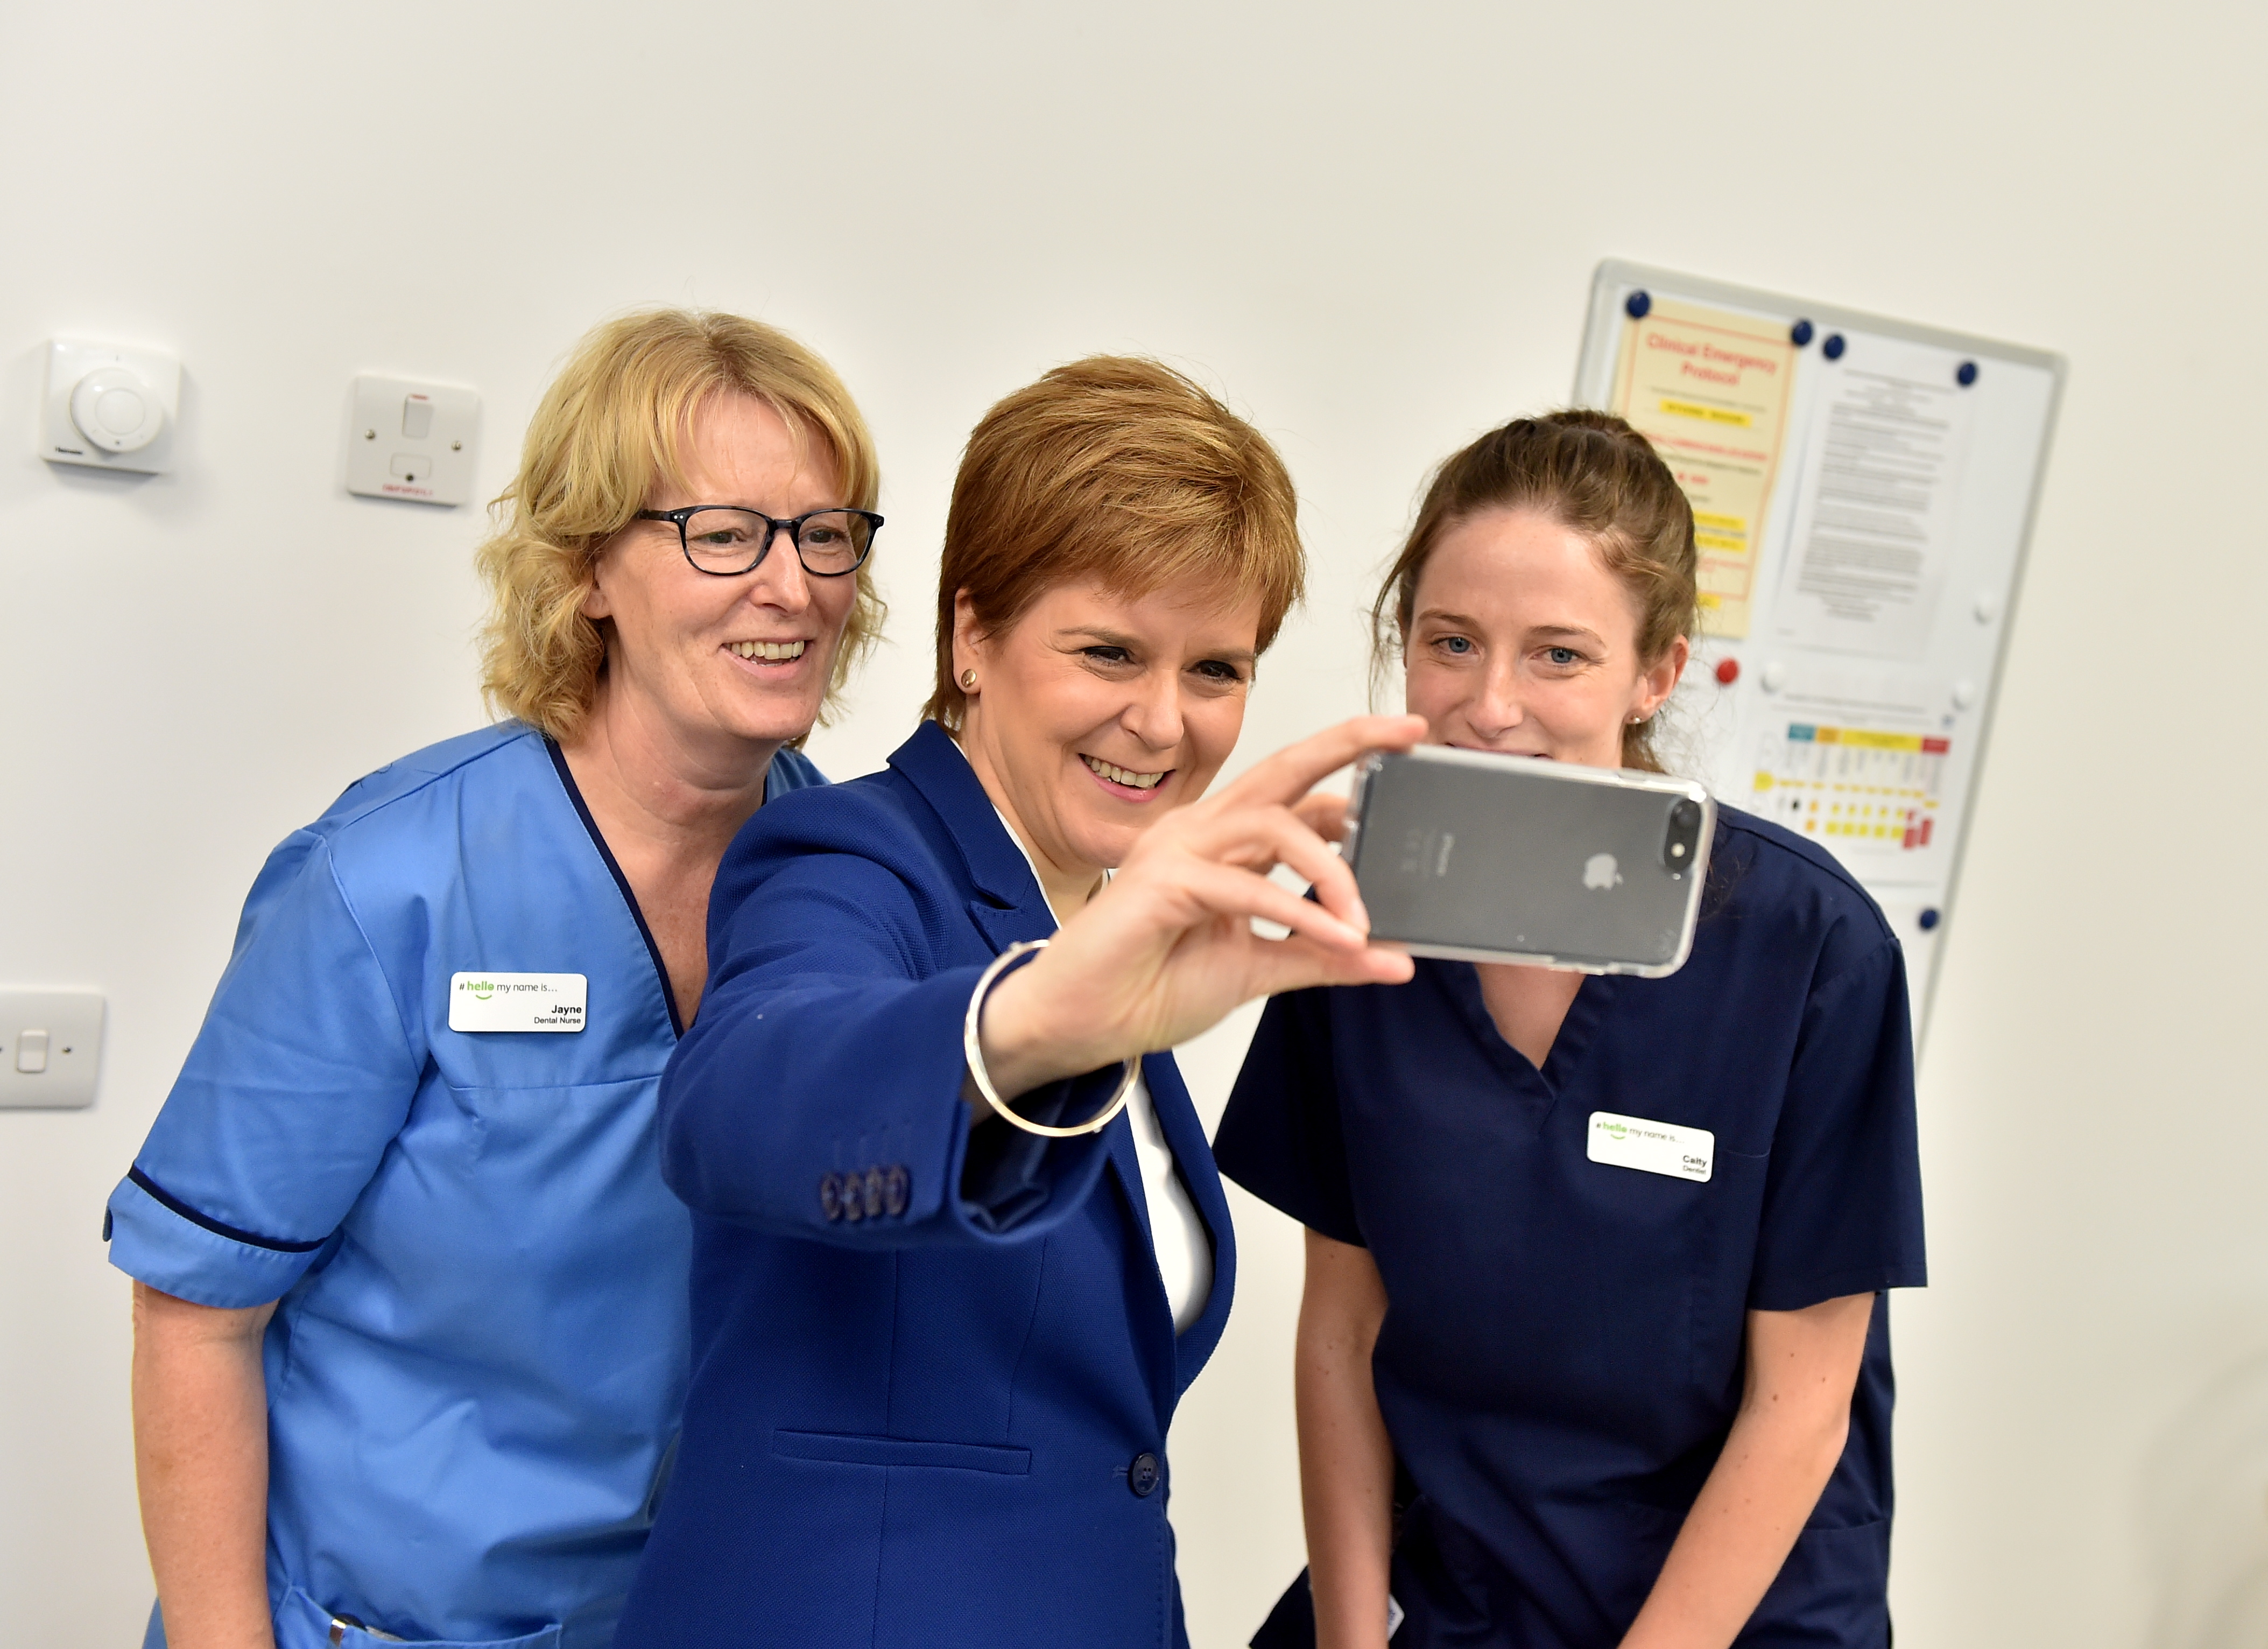 Nicola Sturgeon grabbing a selfie with some people in the hub.